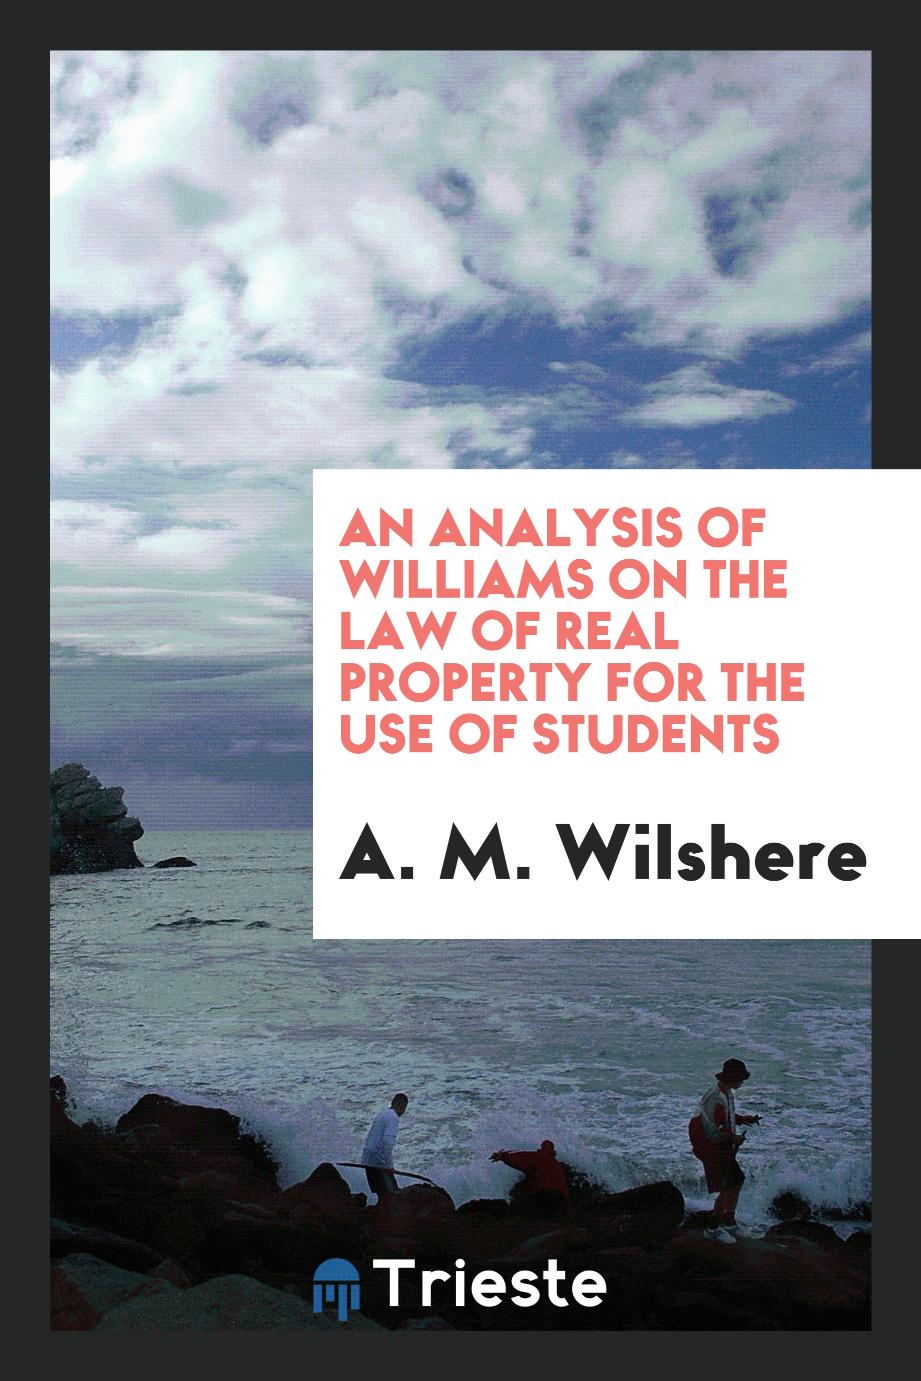 An Analysis of Williams on the Law of Real Property for the Use of Students